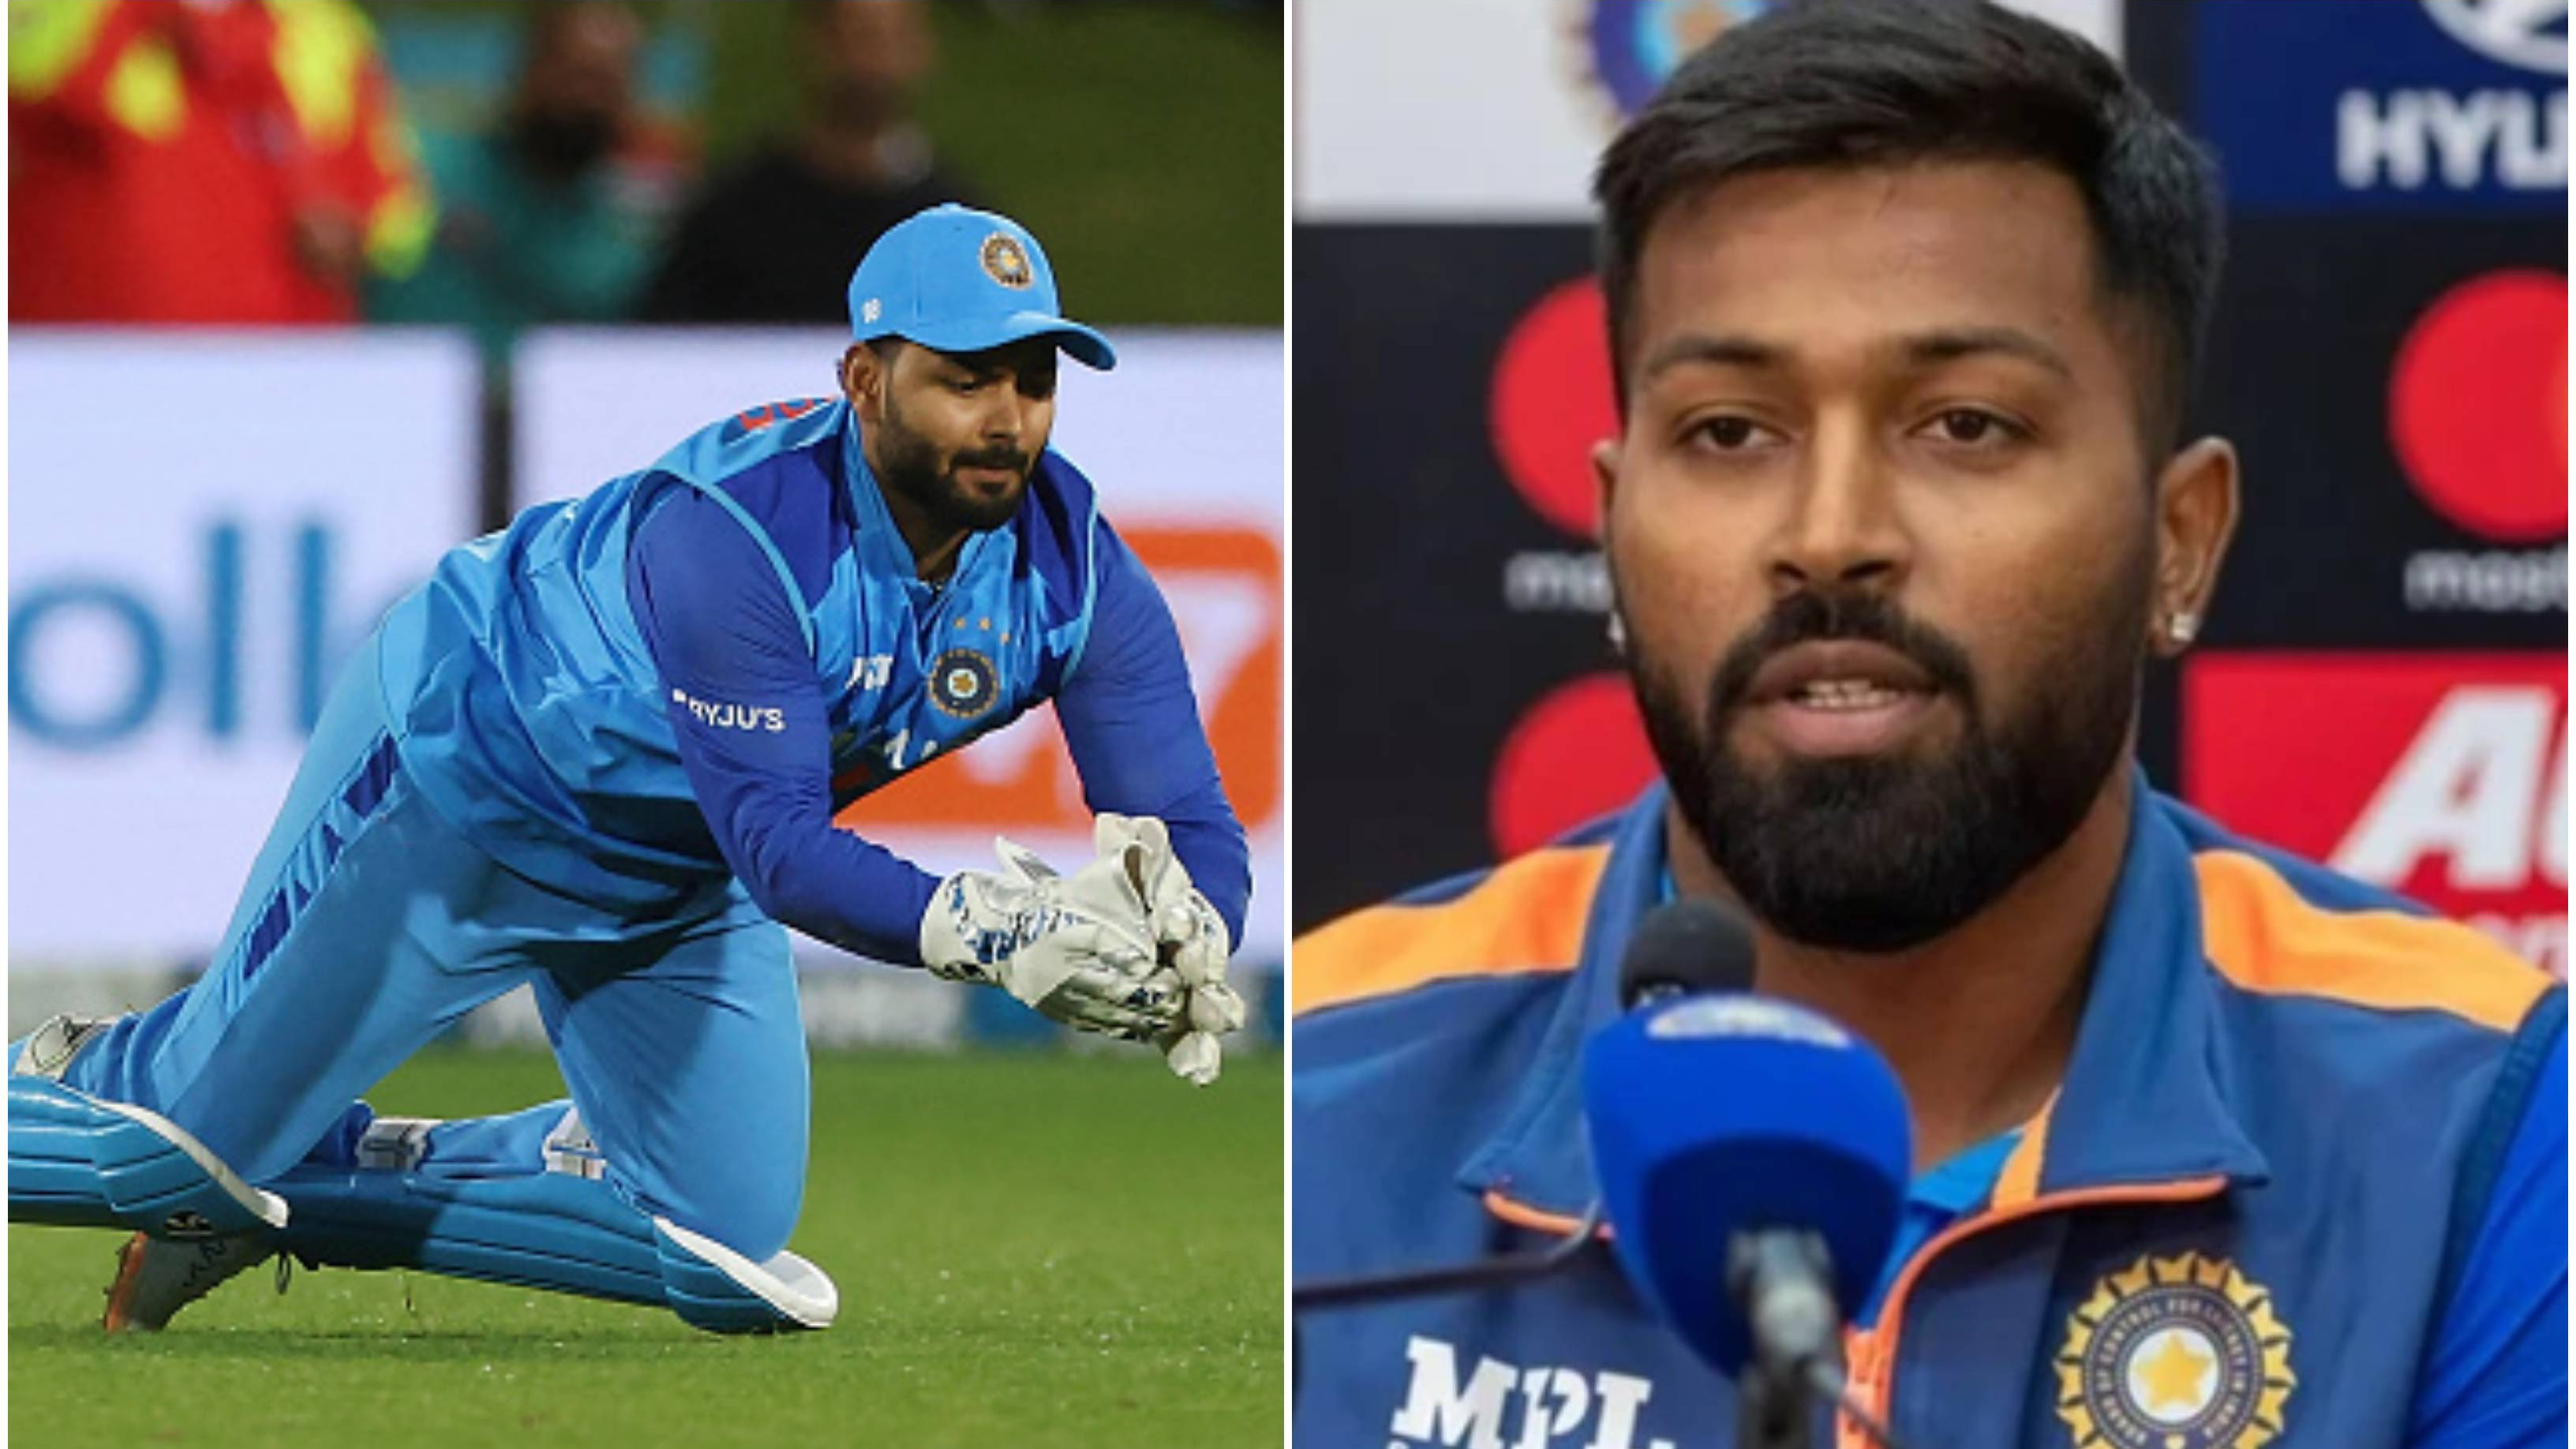 IND v SL 2023: “Our love and prayers are always with him,” Hardik Pandya wishes speedy recovery to Rishabh Pant